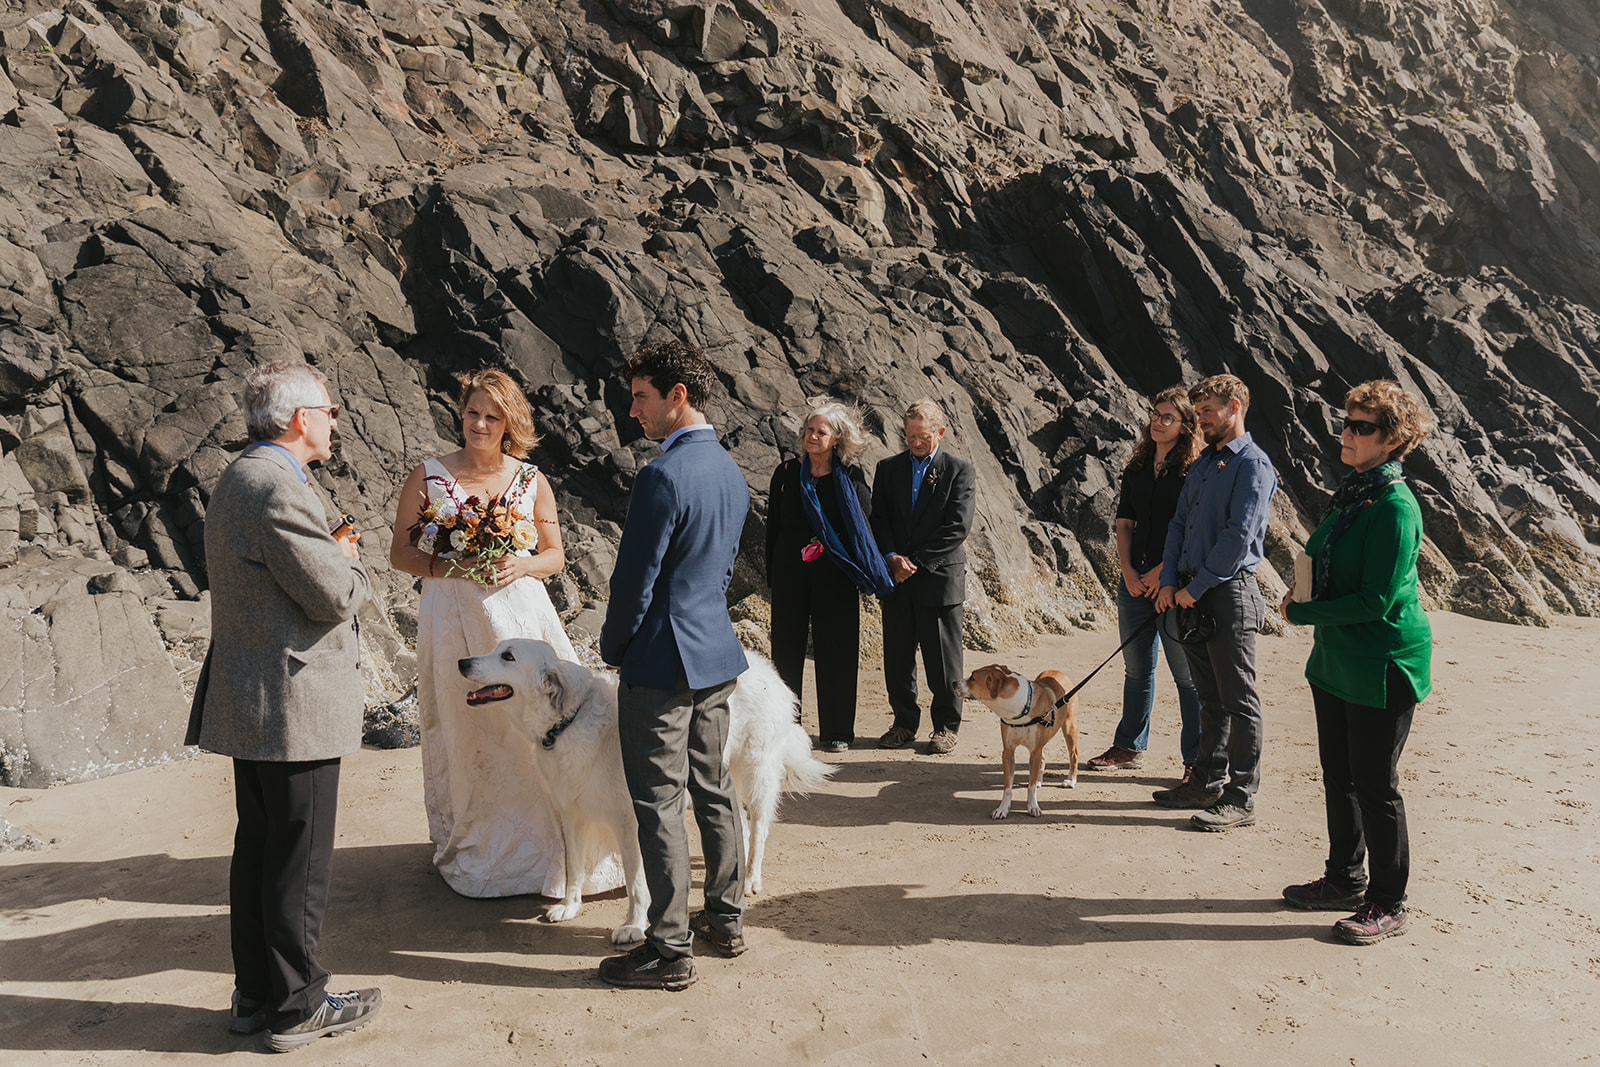 Eloping with family - a couple stands with their dog between them as family watches their elopement ceremony on a rocky beach